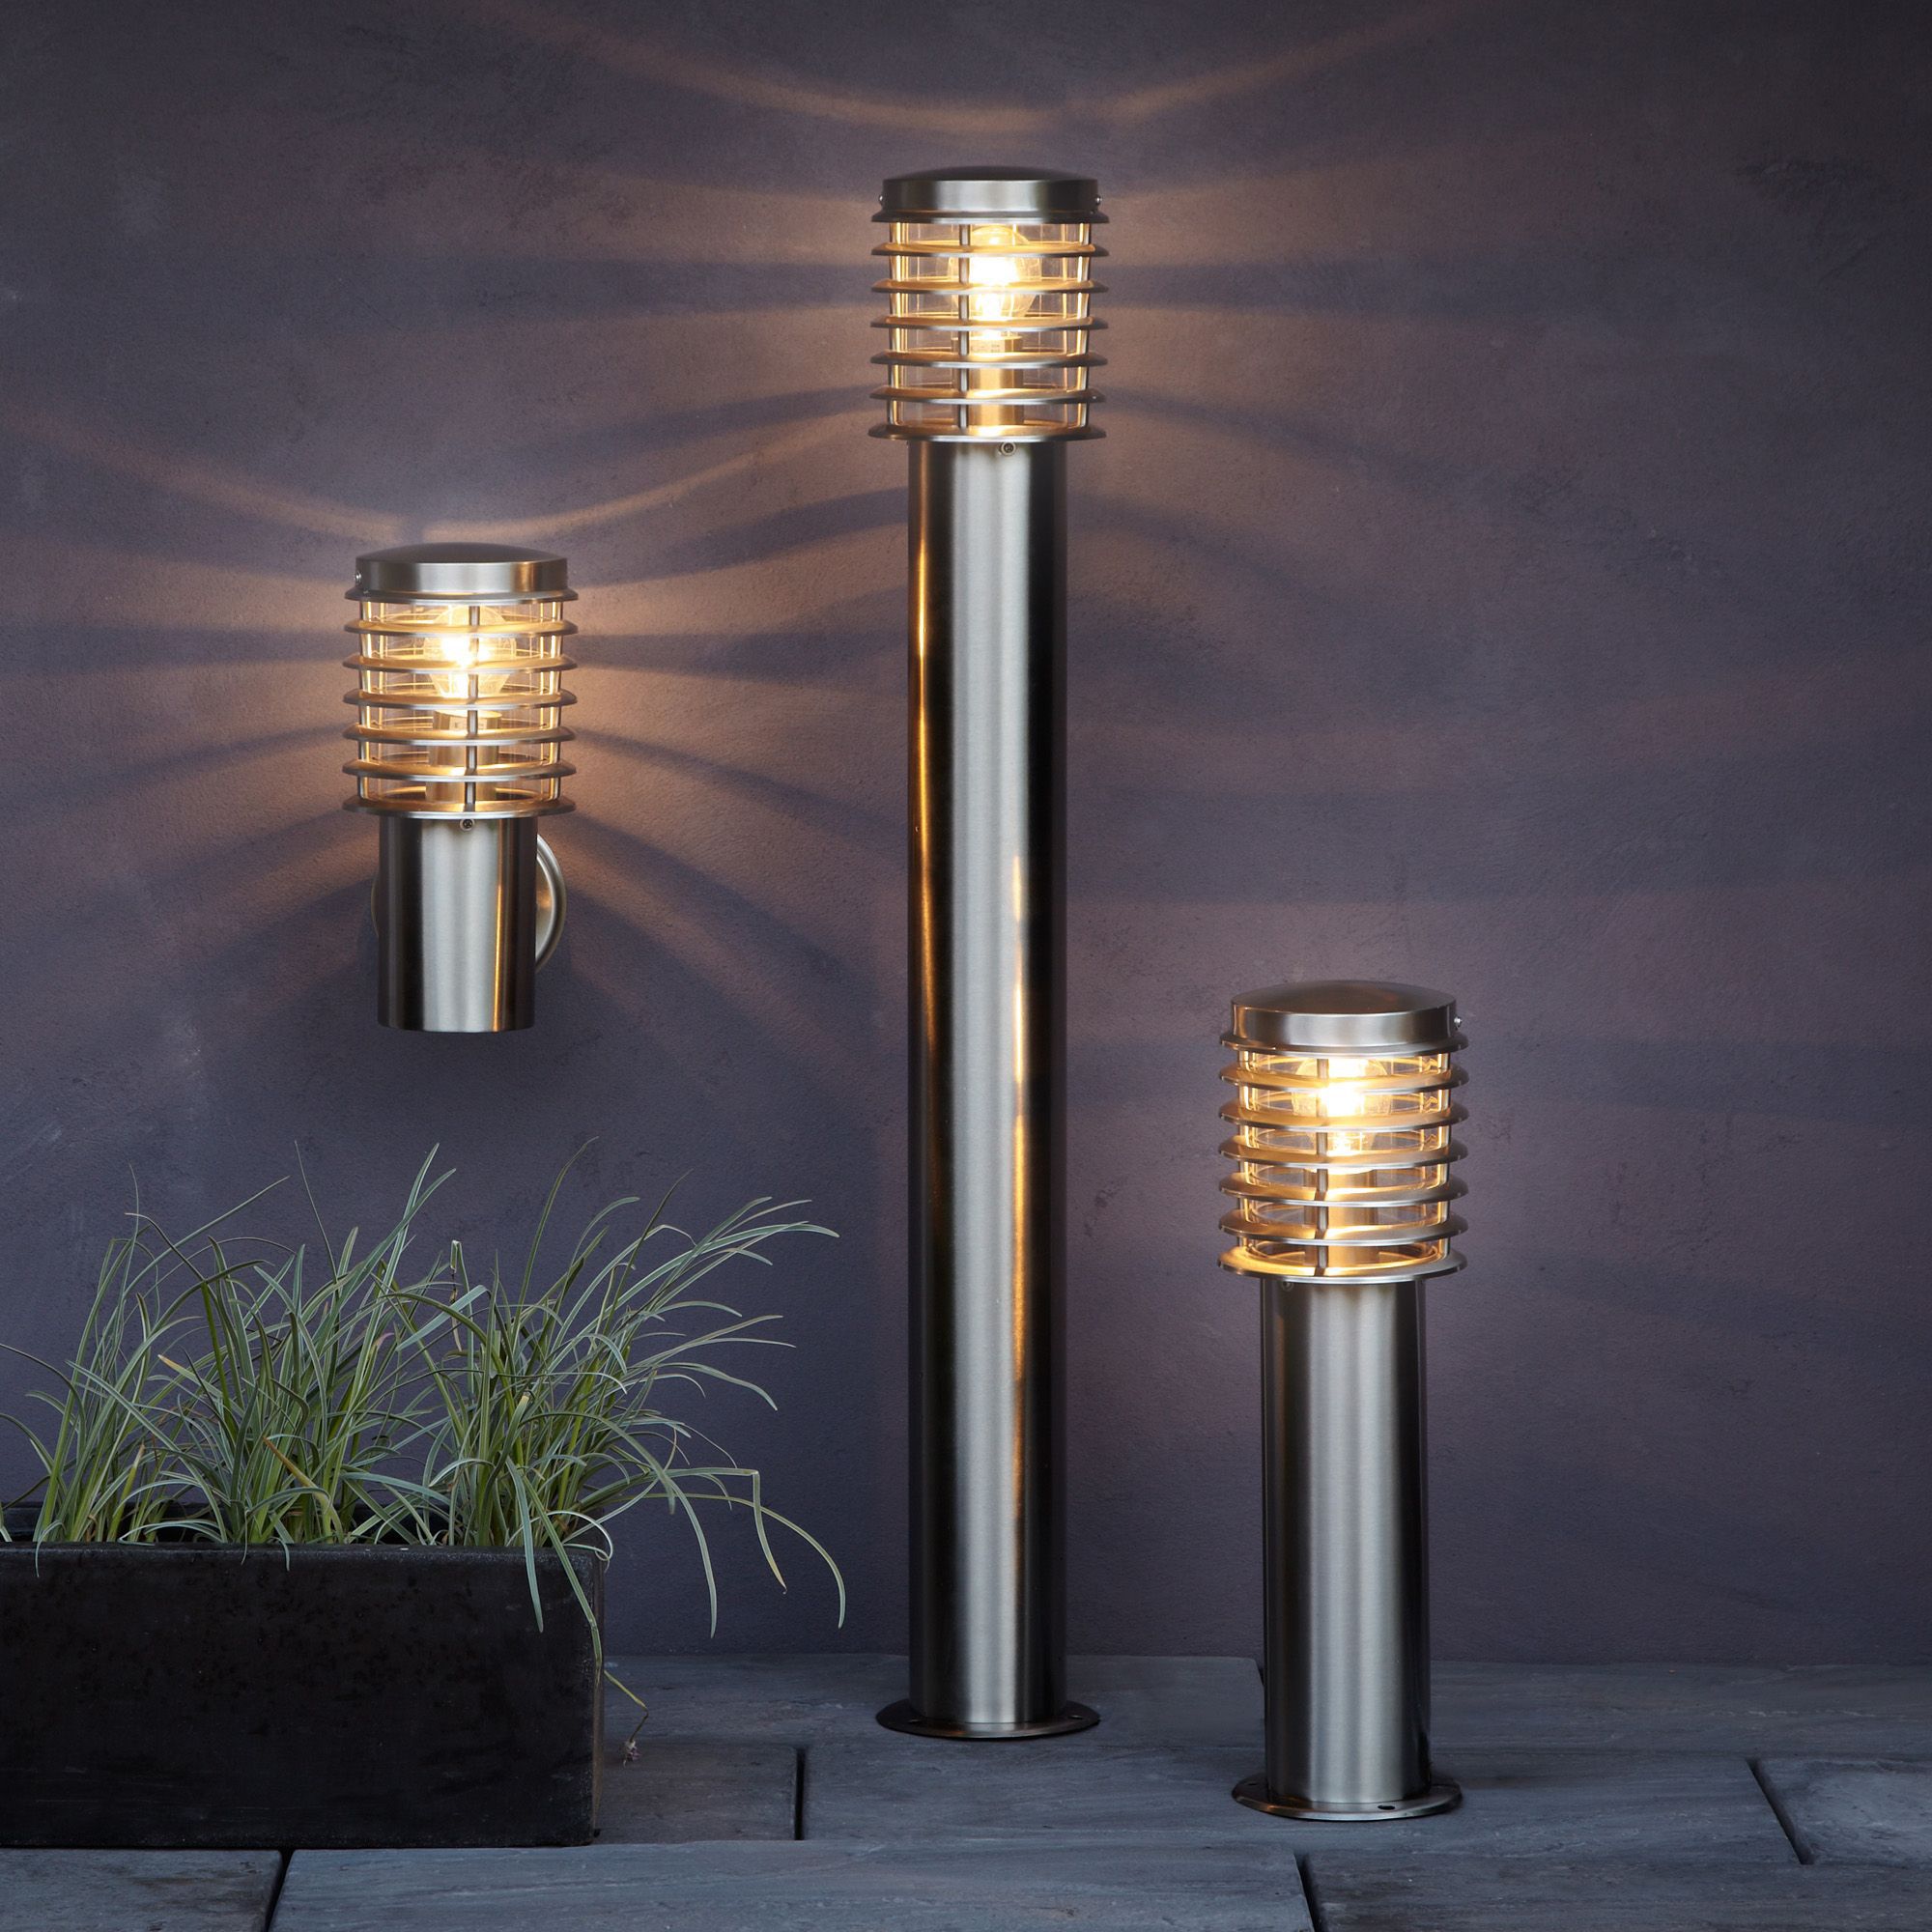 Clipper Stainless steel effect Mains-powered Outdoor Wall light